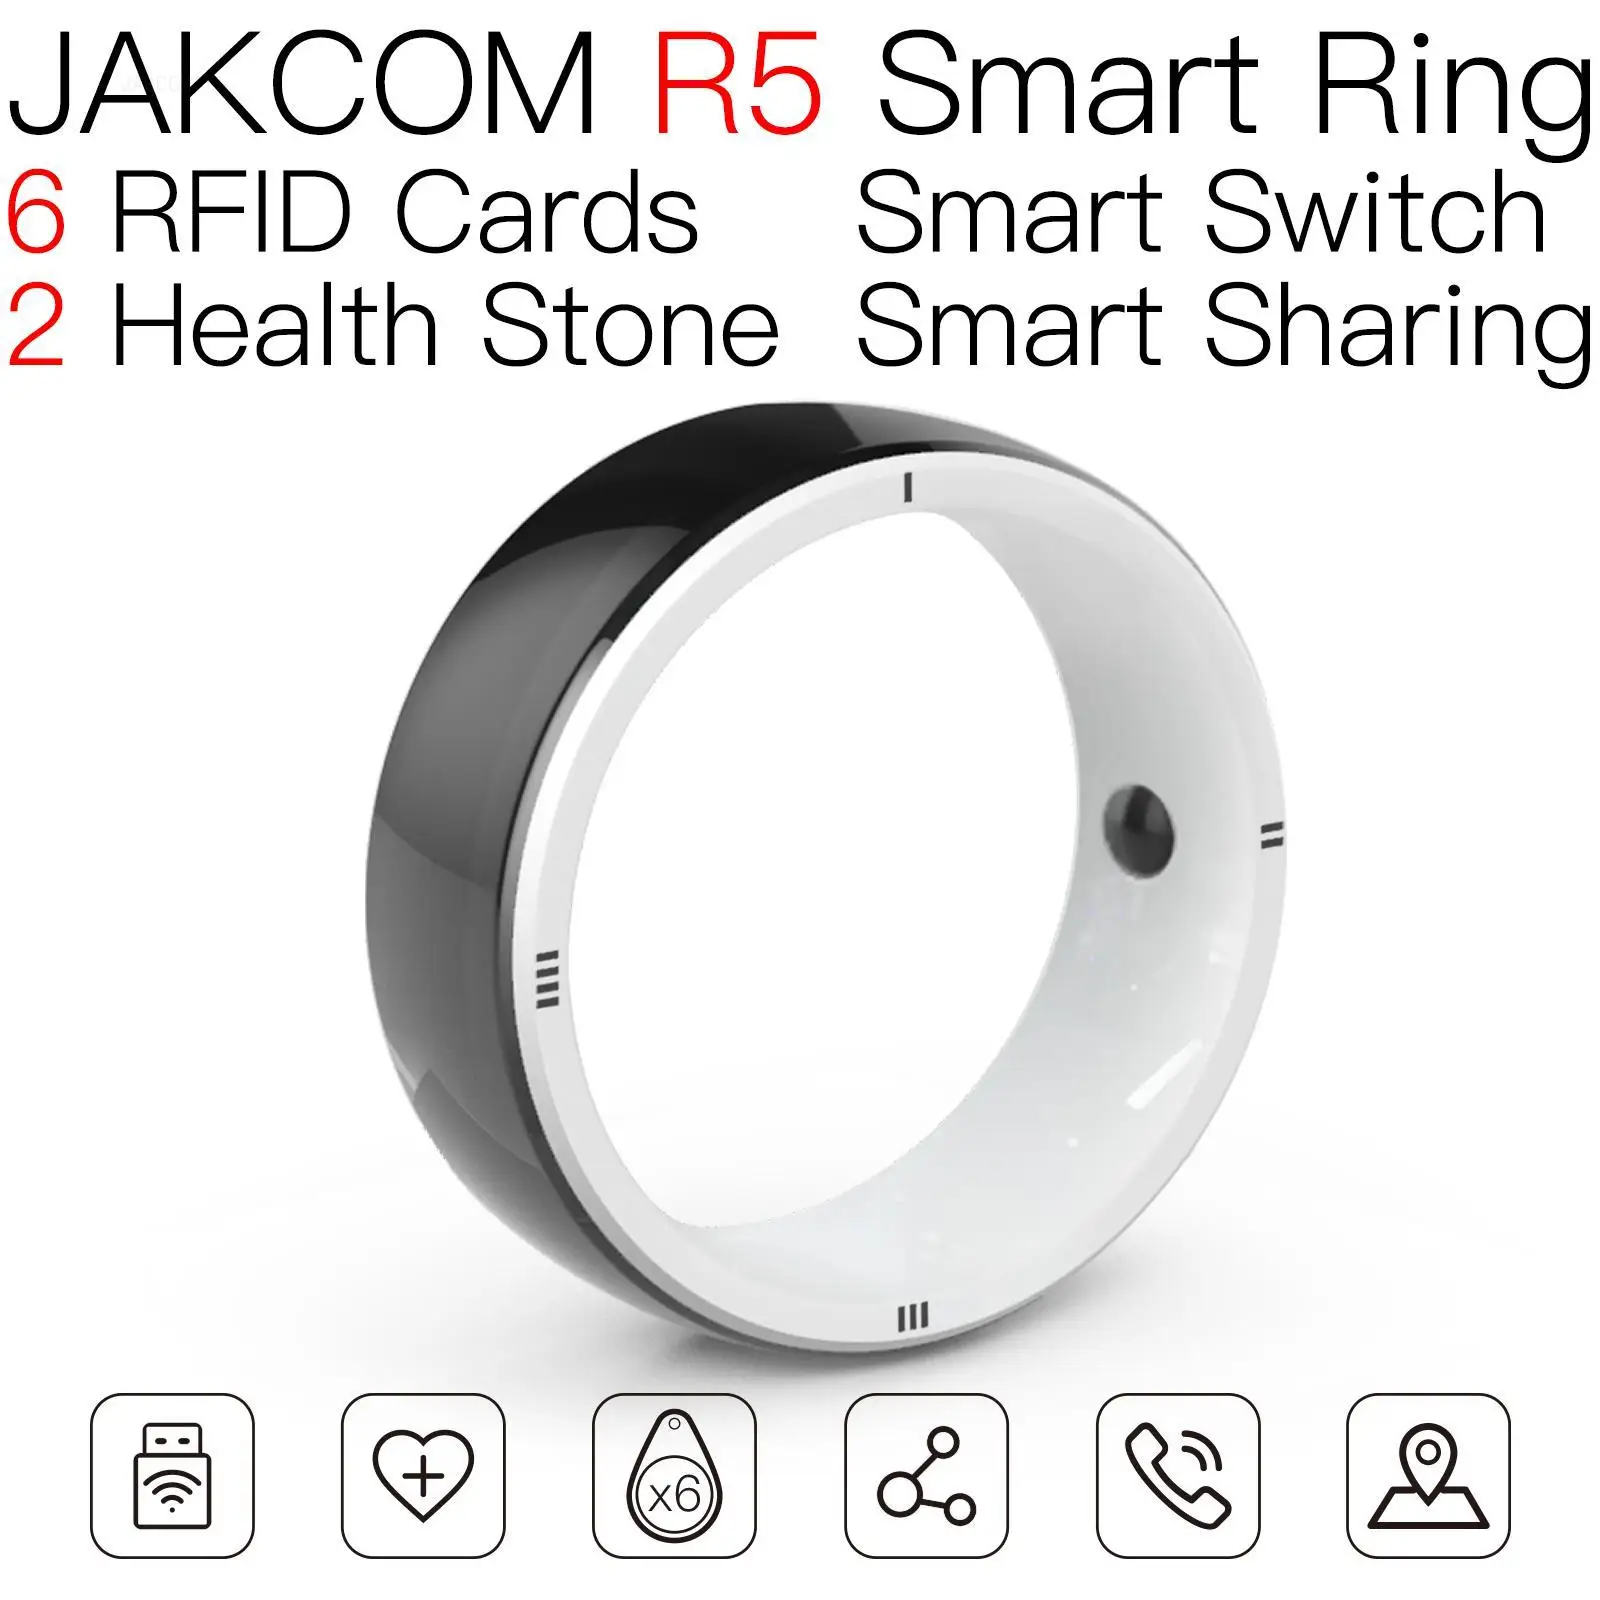 

JAKCOM R5 Smart Ring Super value than nfc card business t5577 micro game ic type a id 33 copy carte amiboo new horizons agnes